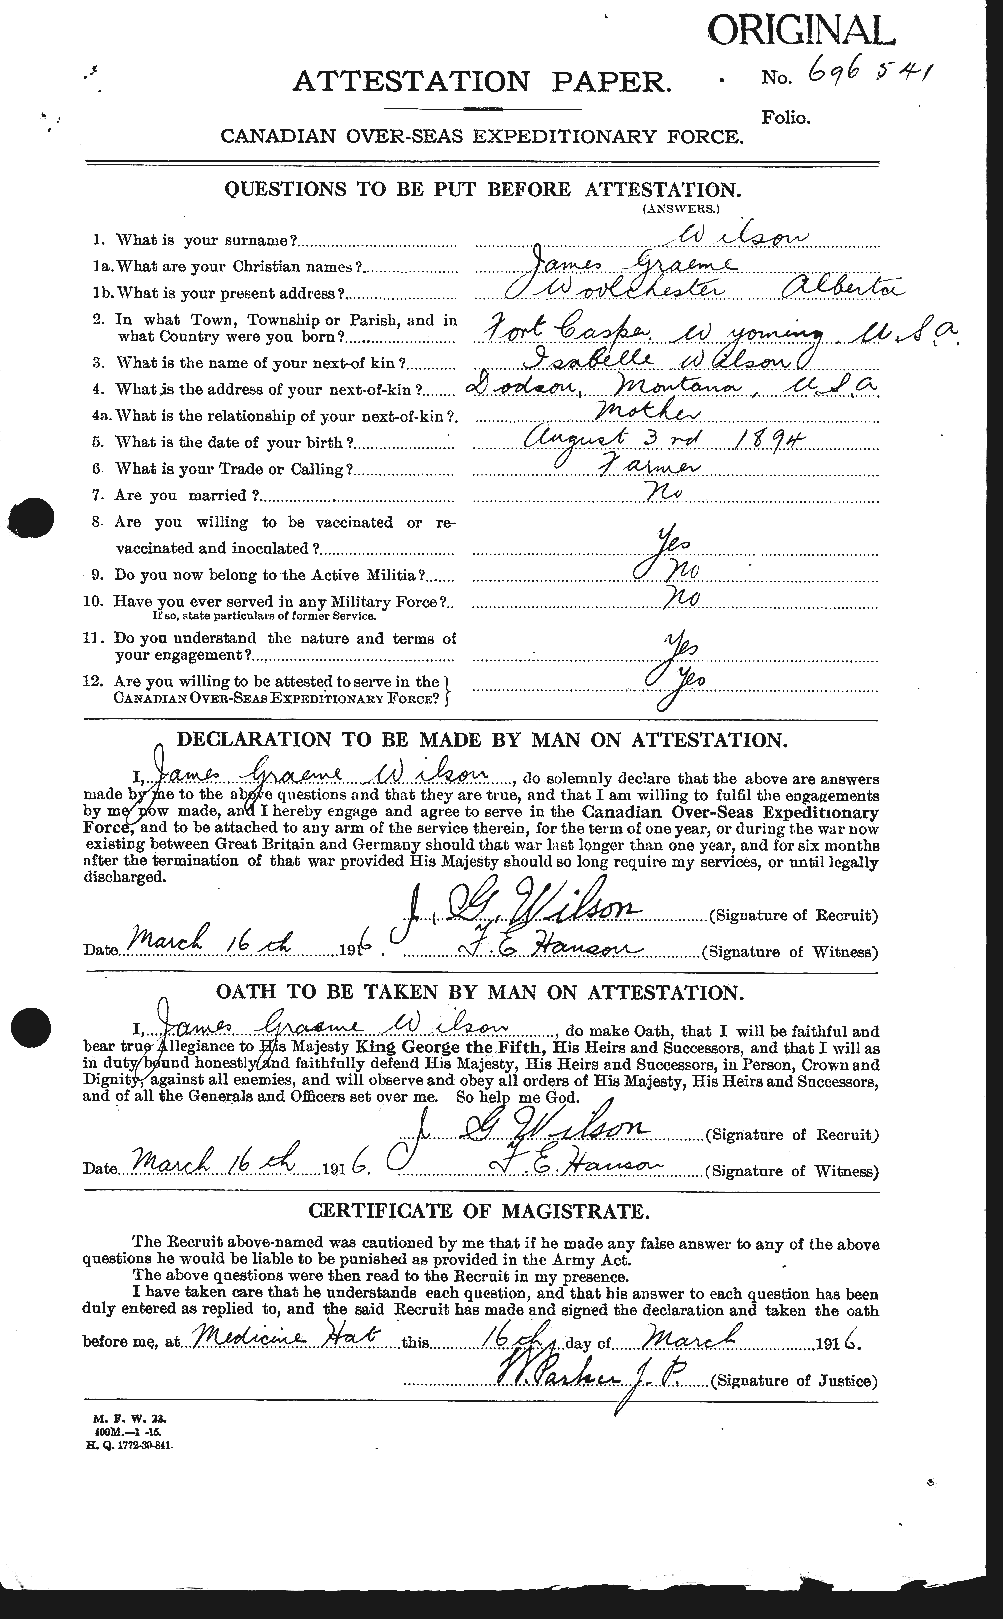 Personnel Records of the First World War - CEF 681462a